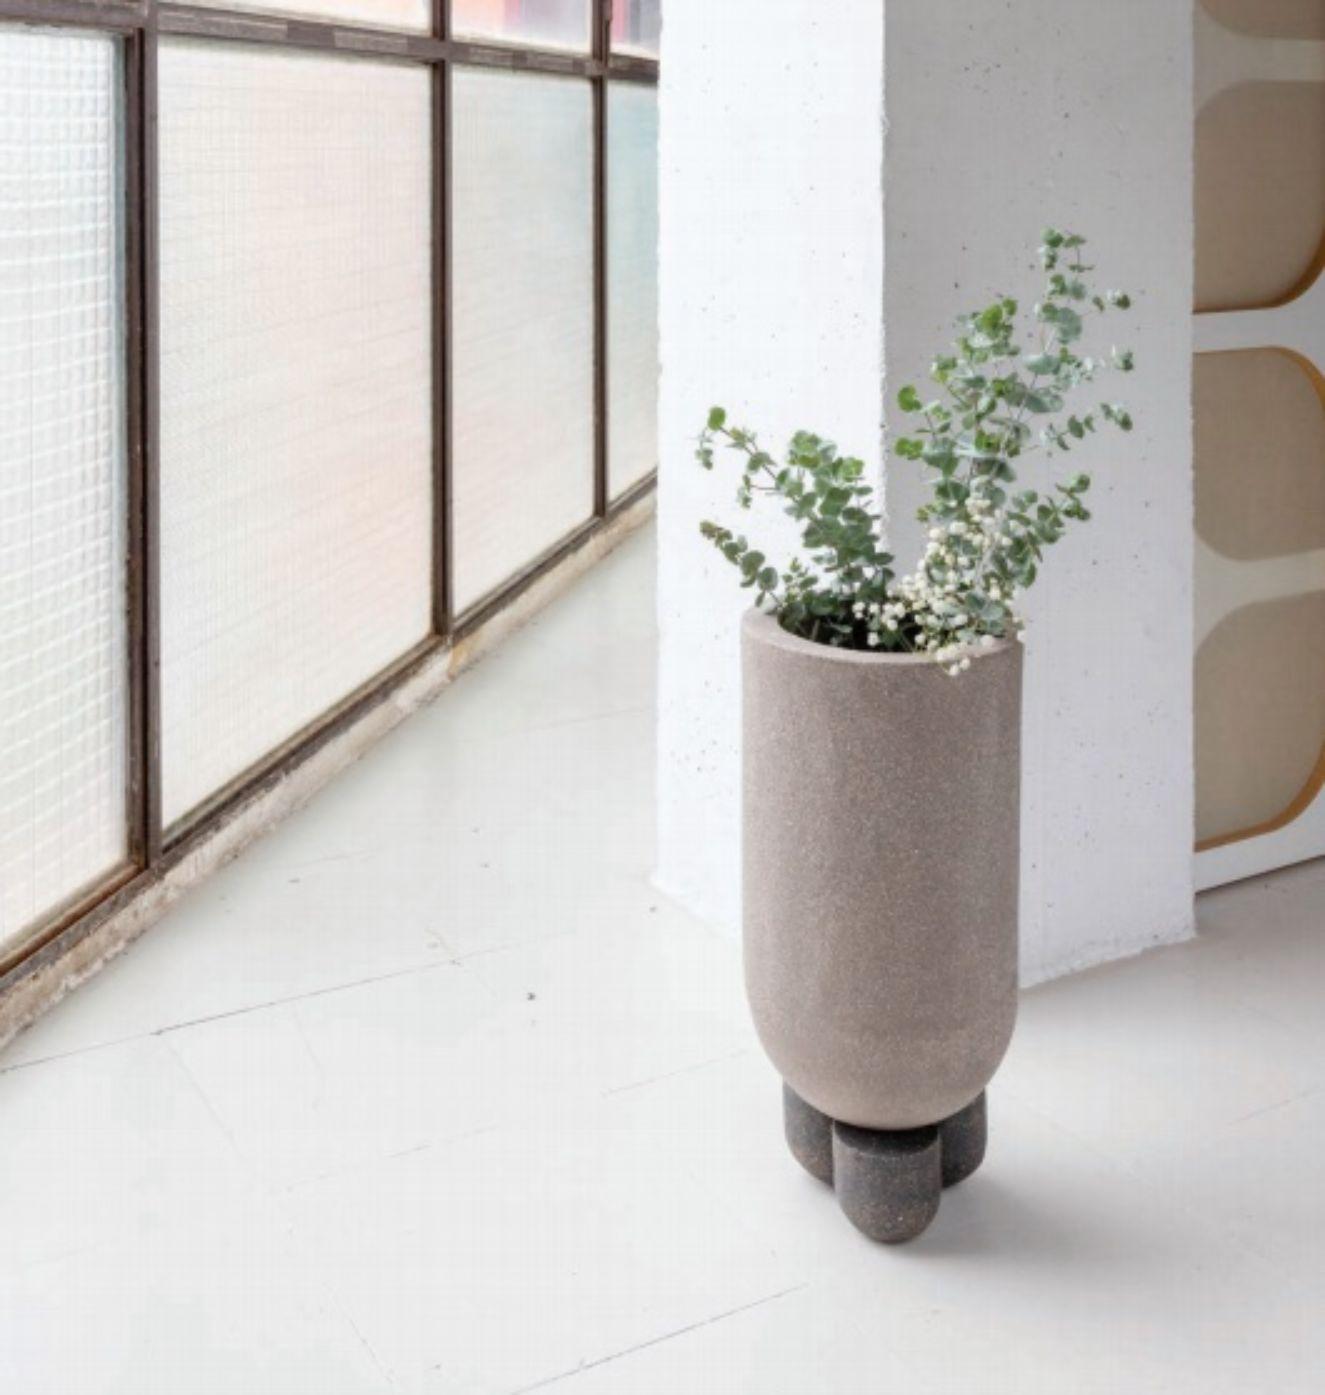 Planter clay vase by Lisa Allegra
Dimensions: ø 20 x 46 cm
Materials: Clay


Born in 1986 in Paris, Lisa Allegra has earned in 2010 a degree in furniture design from the École Supérieure des Arts Décoratifs. She has worked for Tsé&Tsé Associées